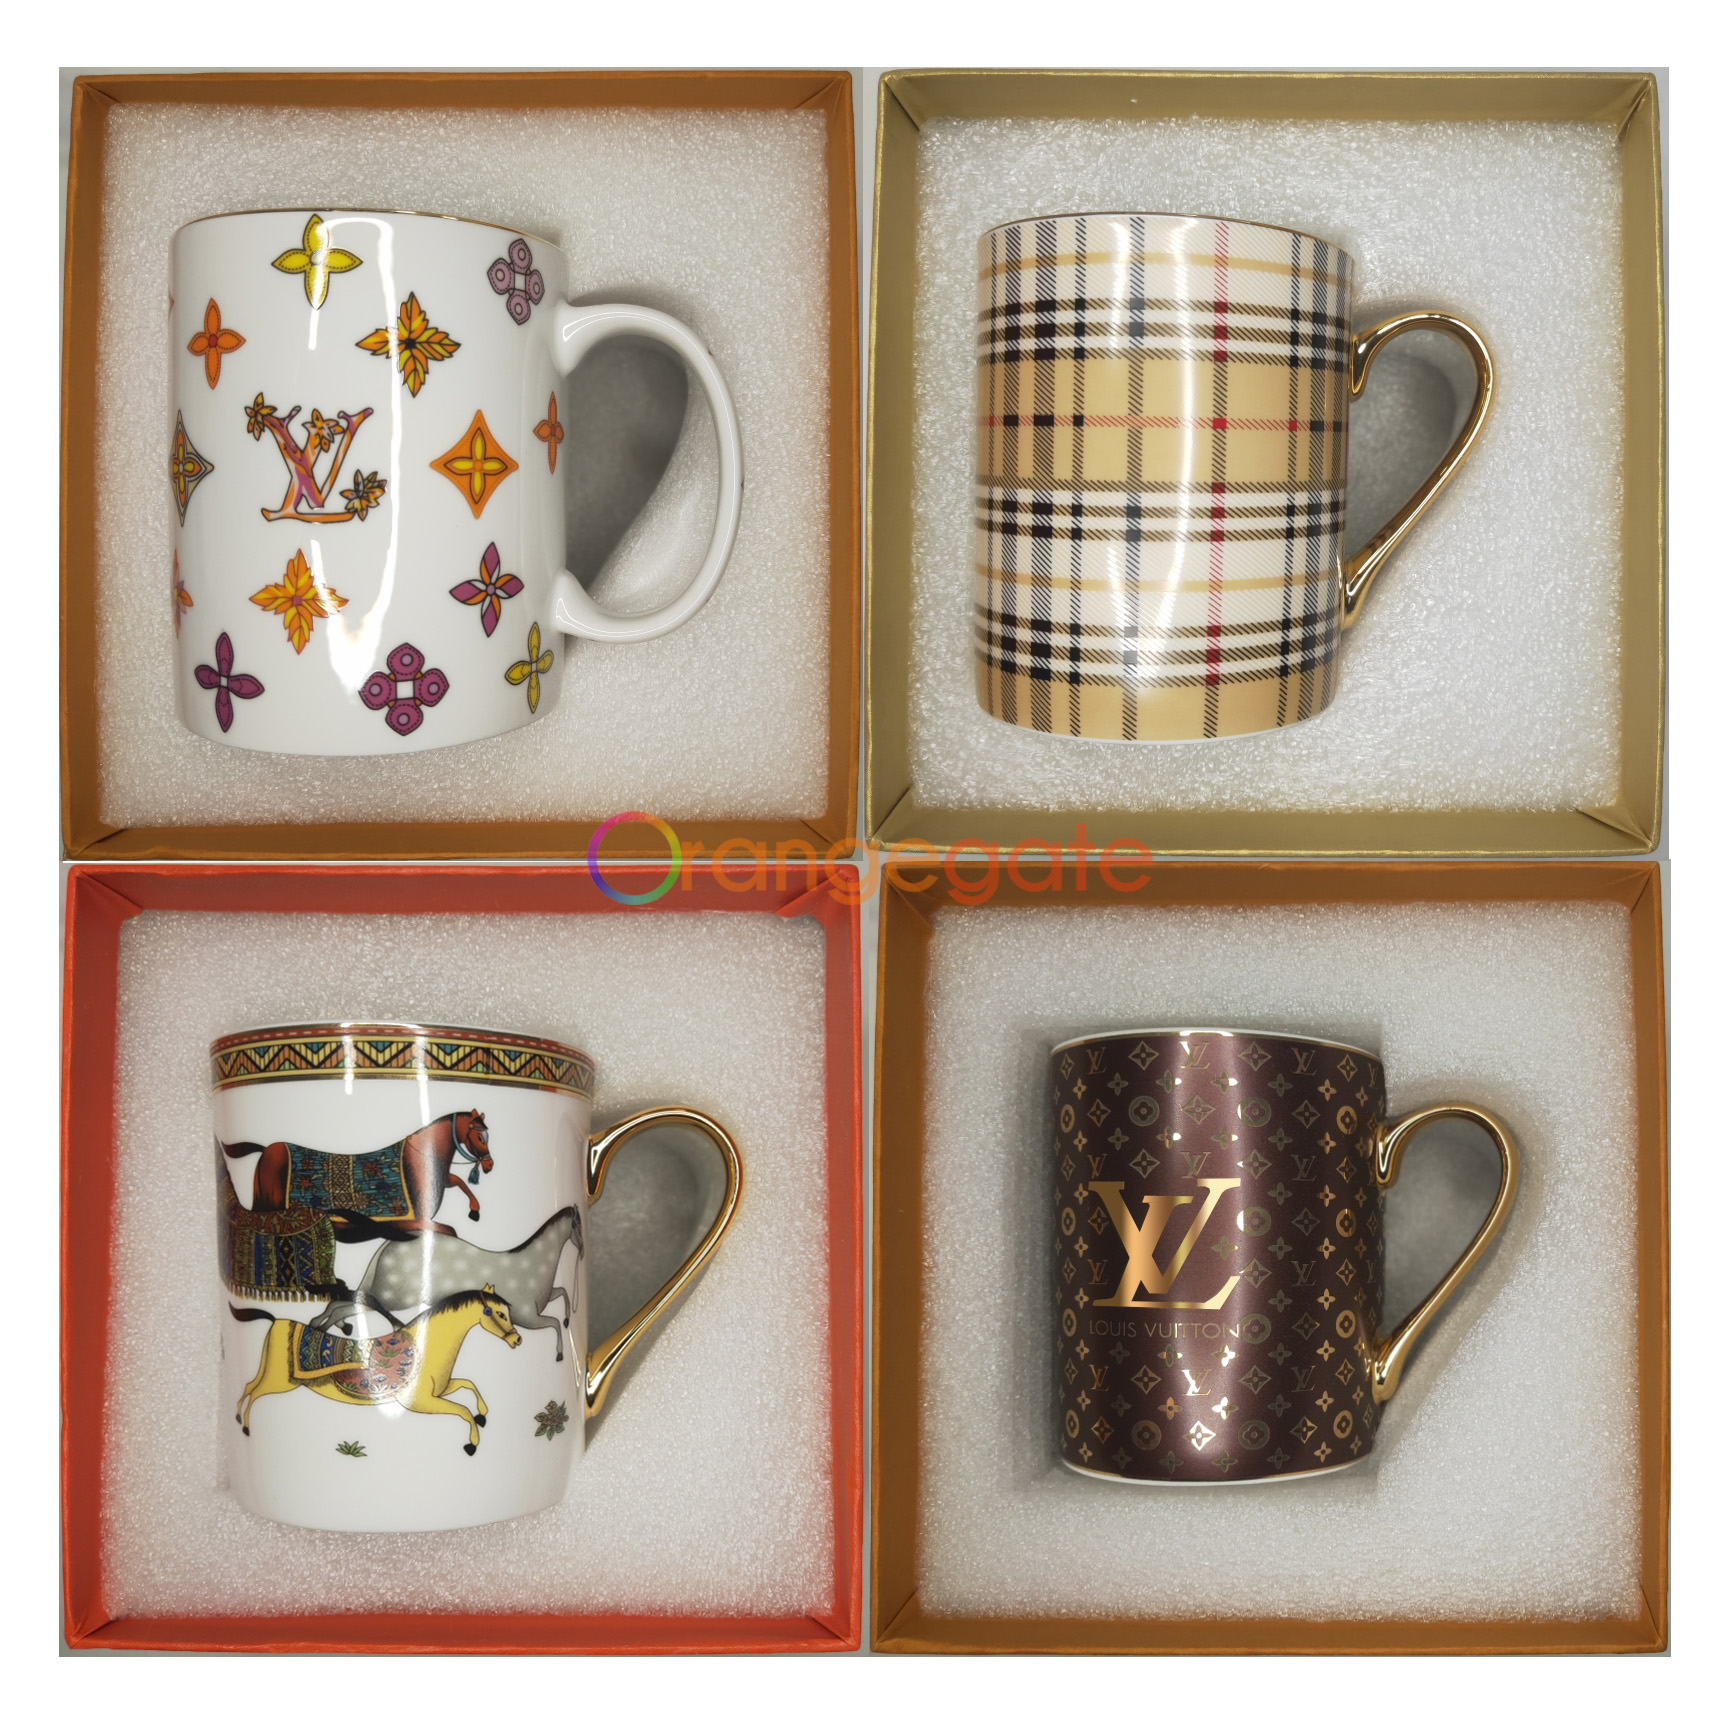 Elegant Hermes, LV, Burberry coffee cup mug Cup and Saucers with Gift Box  Gift Ideas Ceramic Porcelain Bone China Christmas Birthday Anniversary Gift  Suggestion